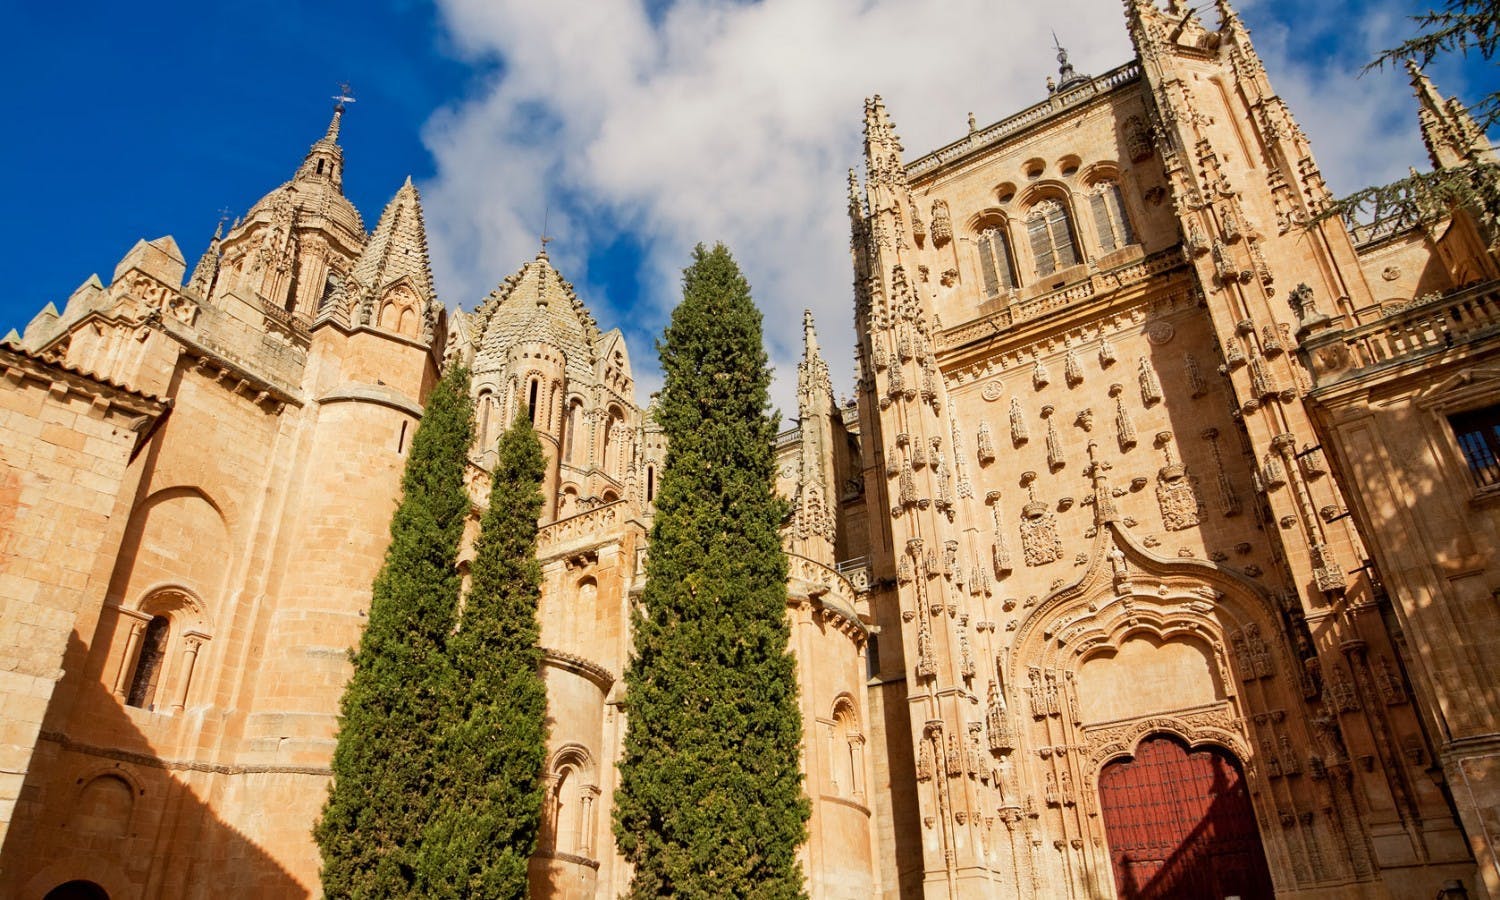 Full-day tour to Avila and Salamanca from Madrid